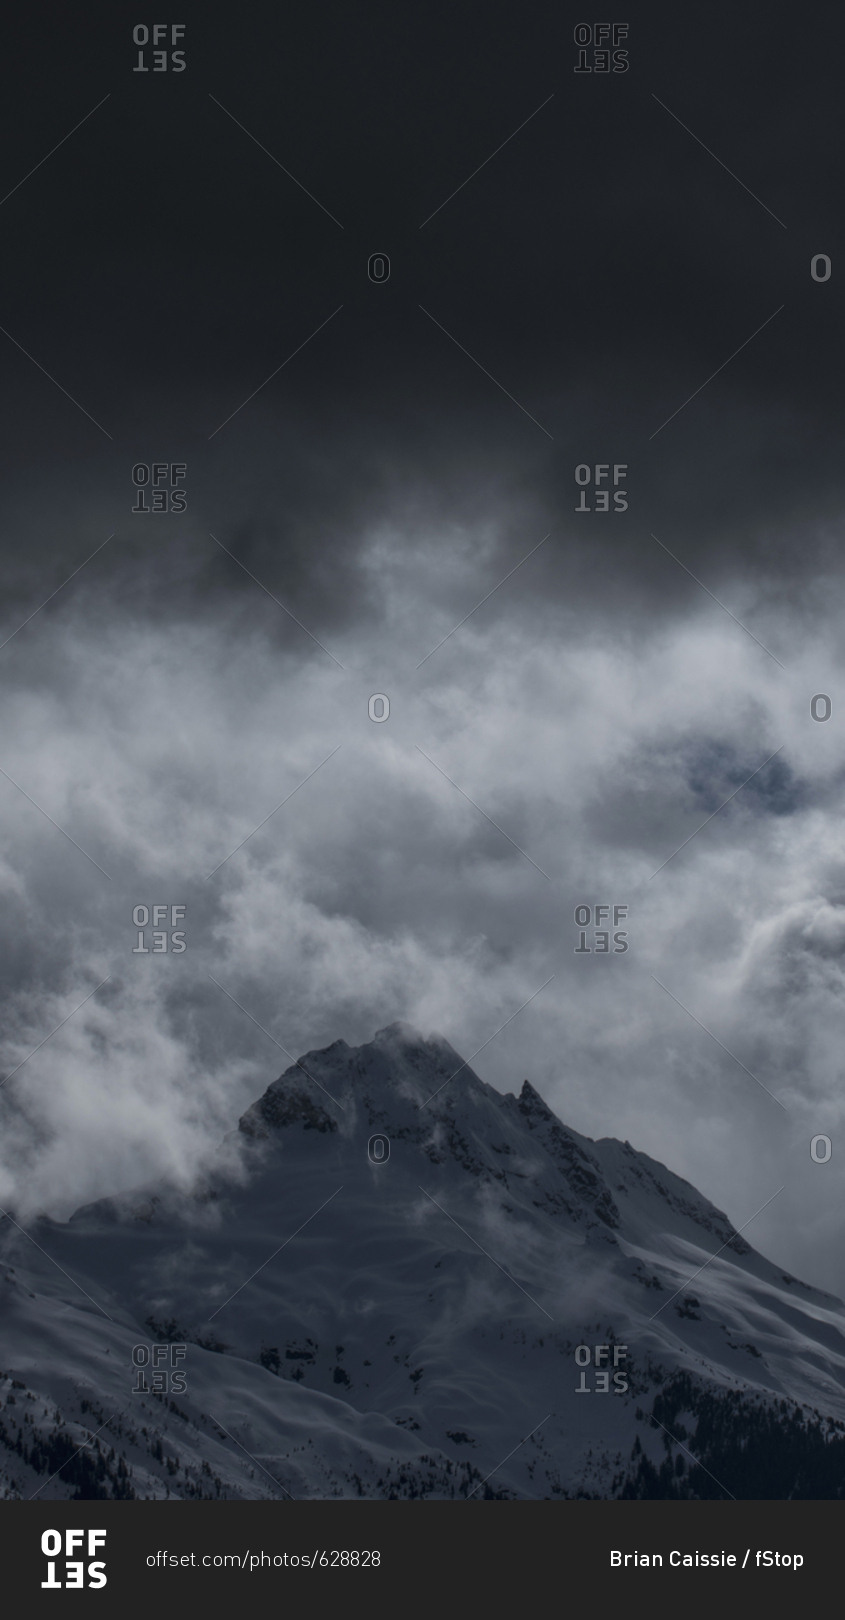 Low angle view of snowcapped mountain against cloudy sky, Tantalus, British Columbia, Canada